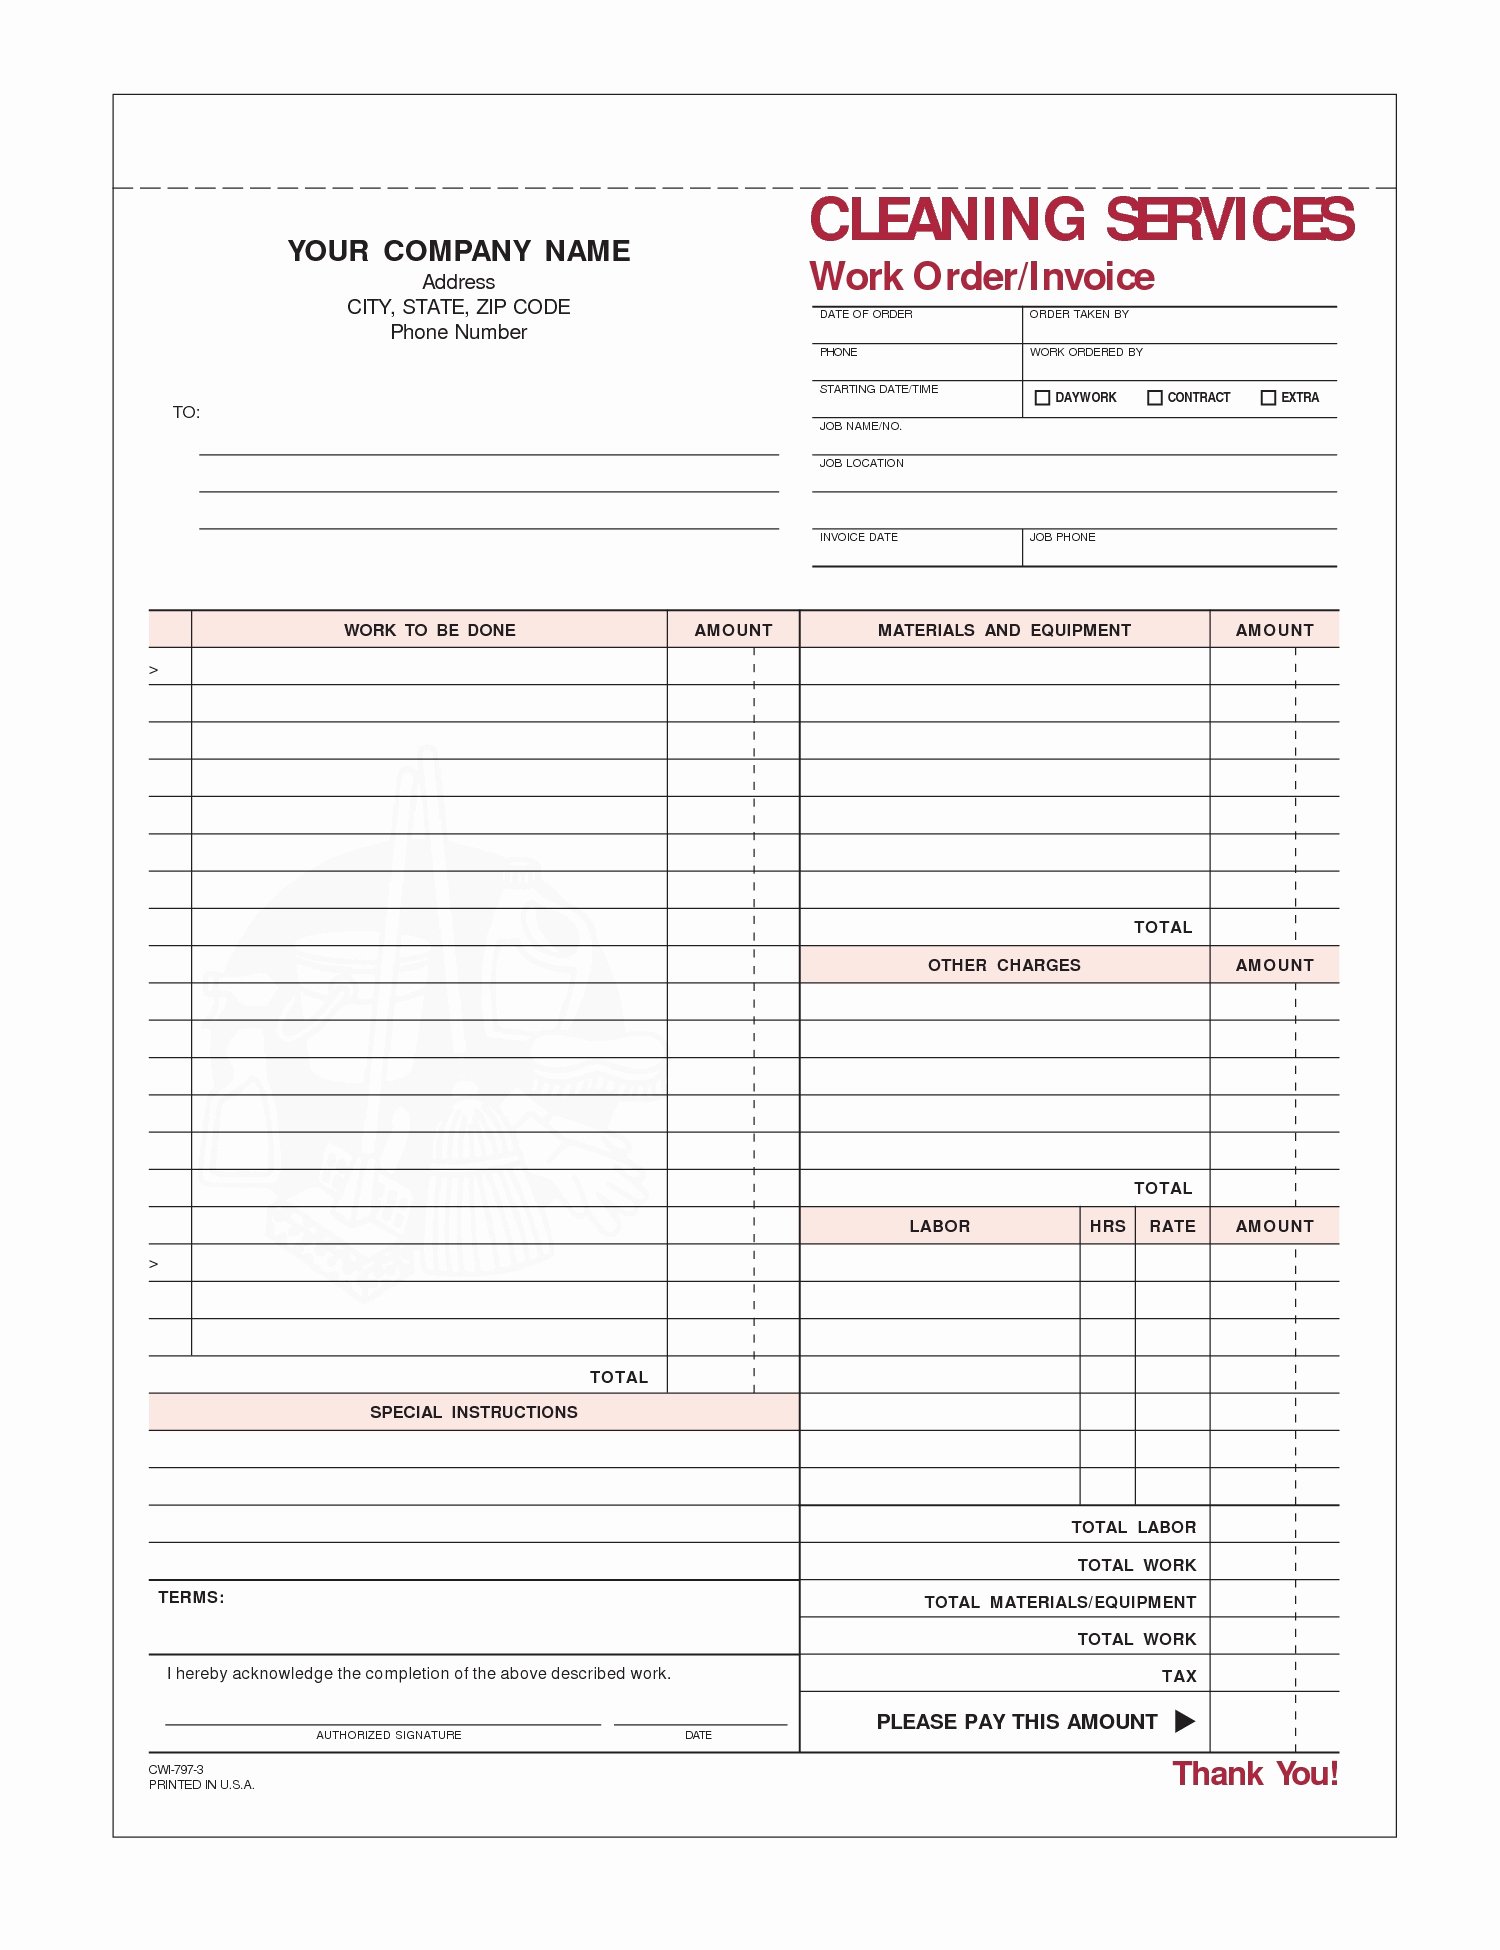 Cleaning Services Invoice Template Unique Cleaning Service Invoice Invoice Template Ideas